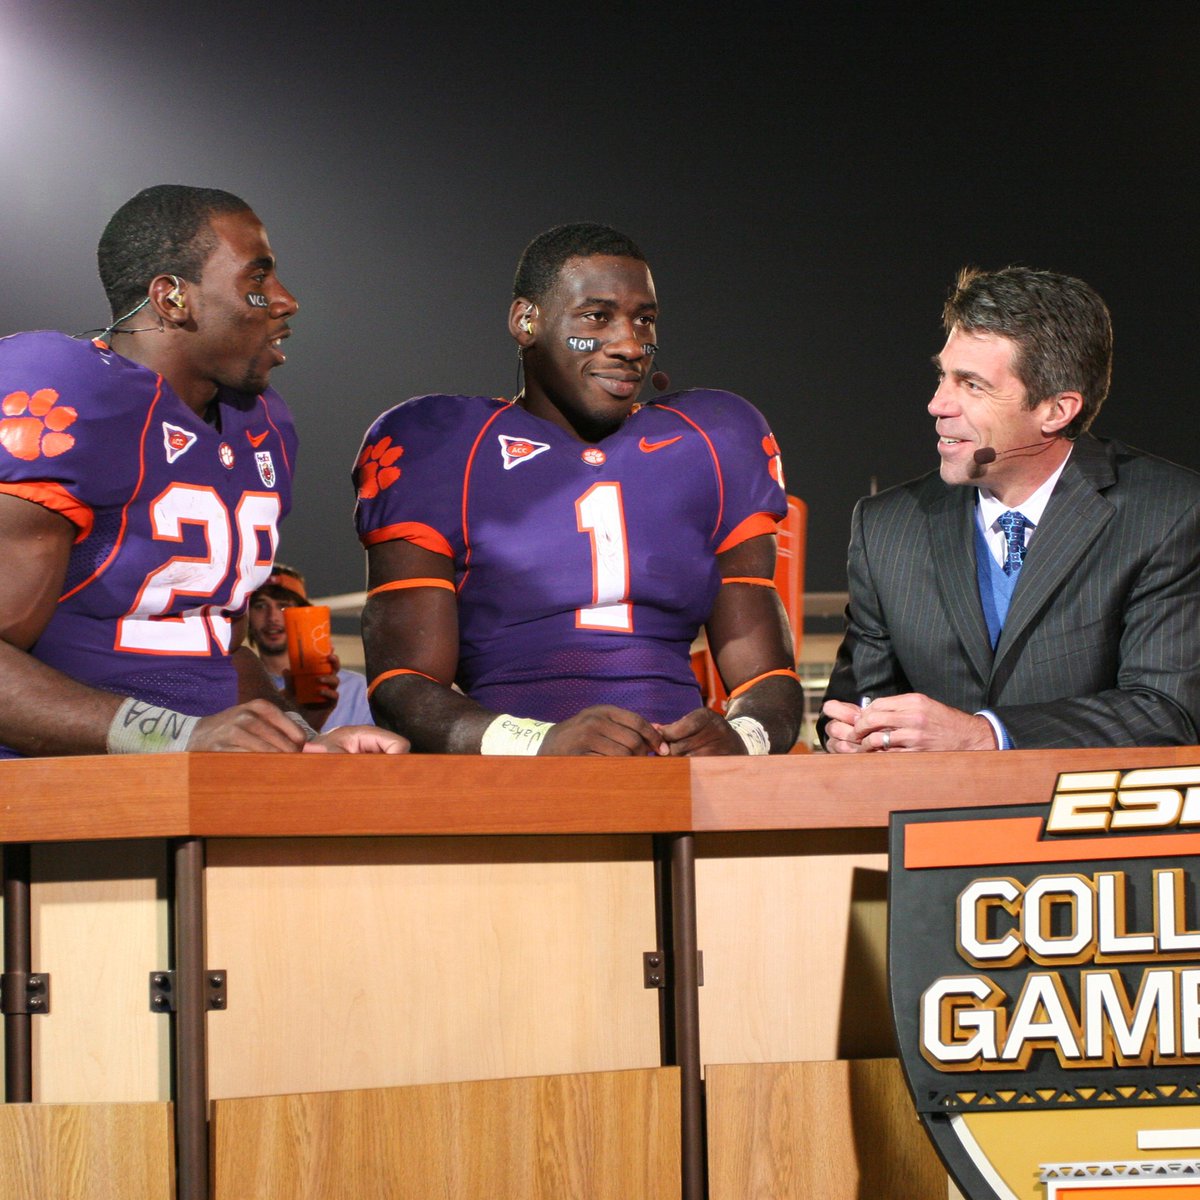 James “Thunder” Davis and CJ “Lightning” Spiller proceeded to run wild on the Jackets, accounting for 372 combined yards and leading the Tigers to a dominating 31-7 win that is still the golden moment for Clemson’s purple uniforms to this day.